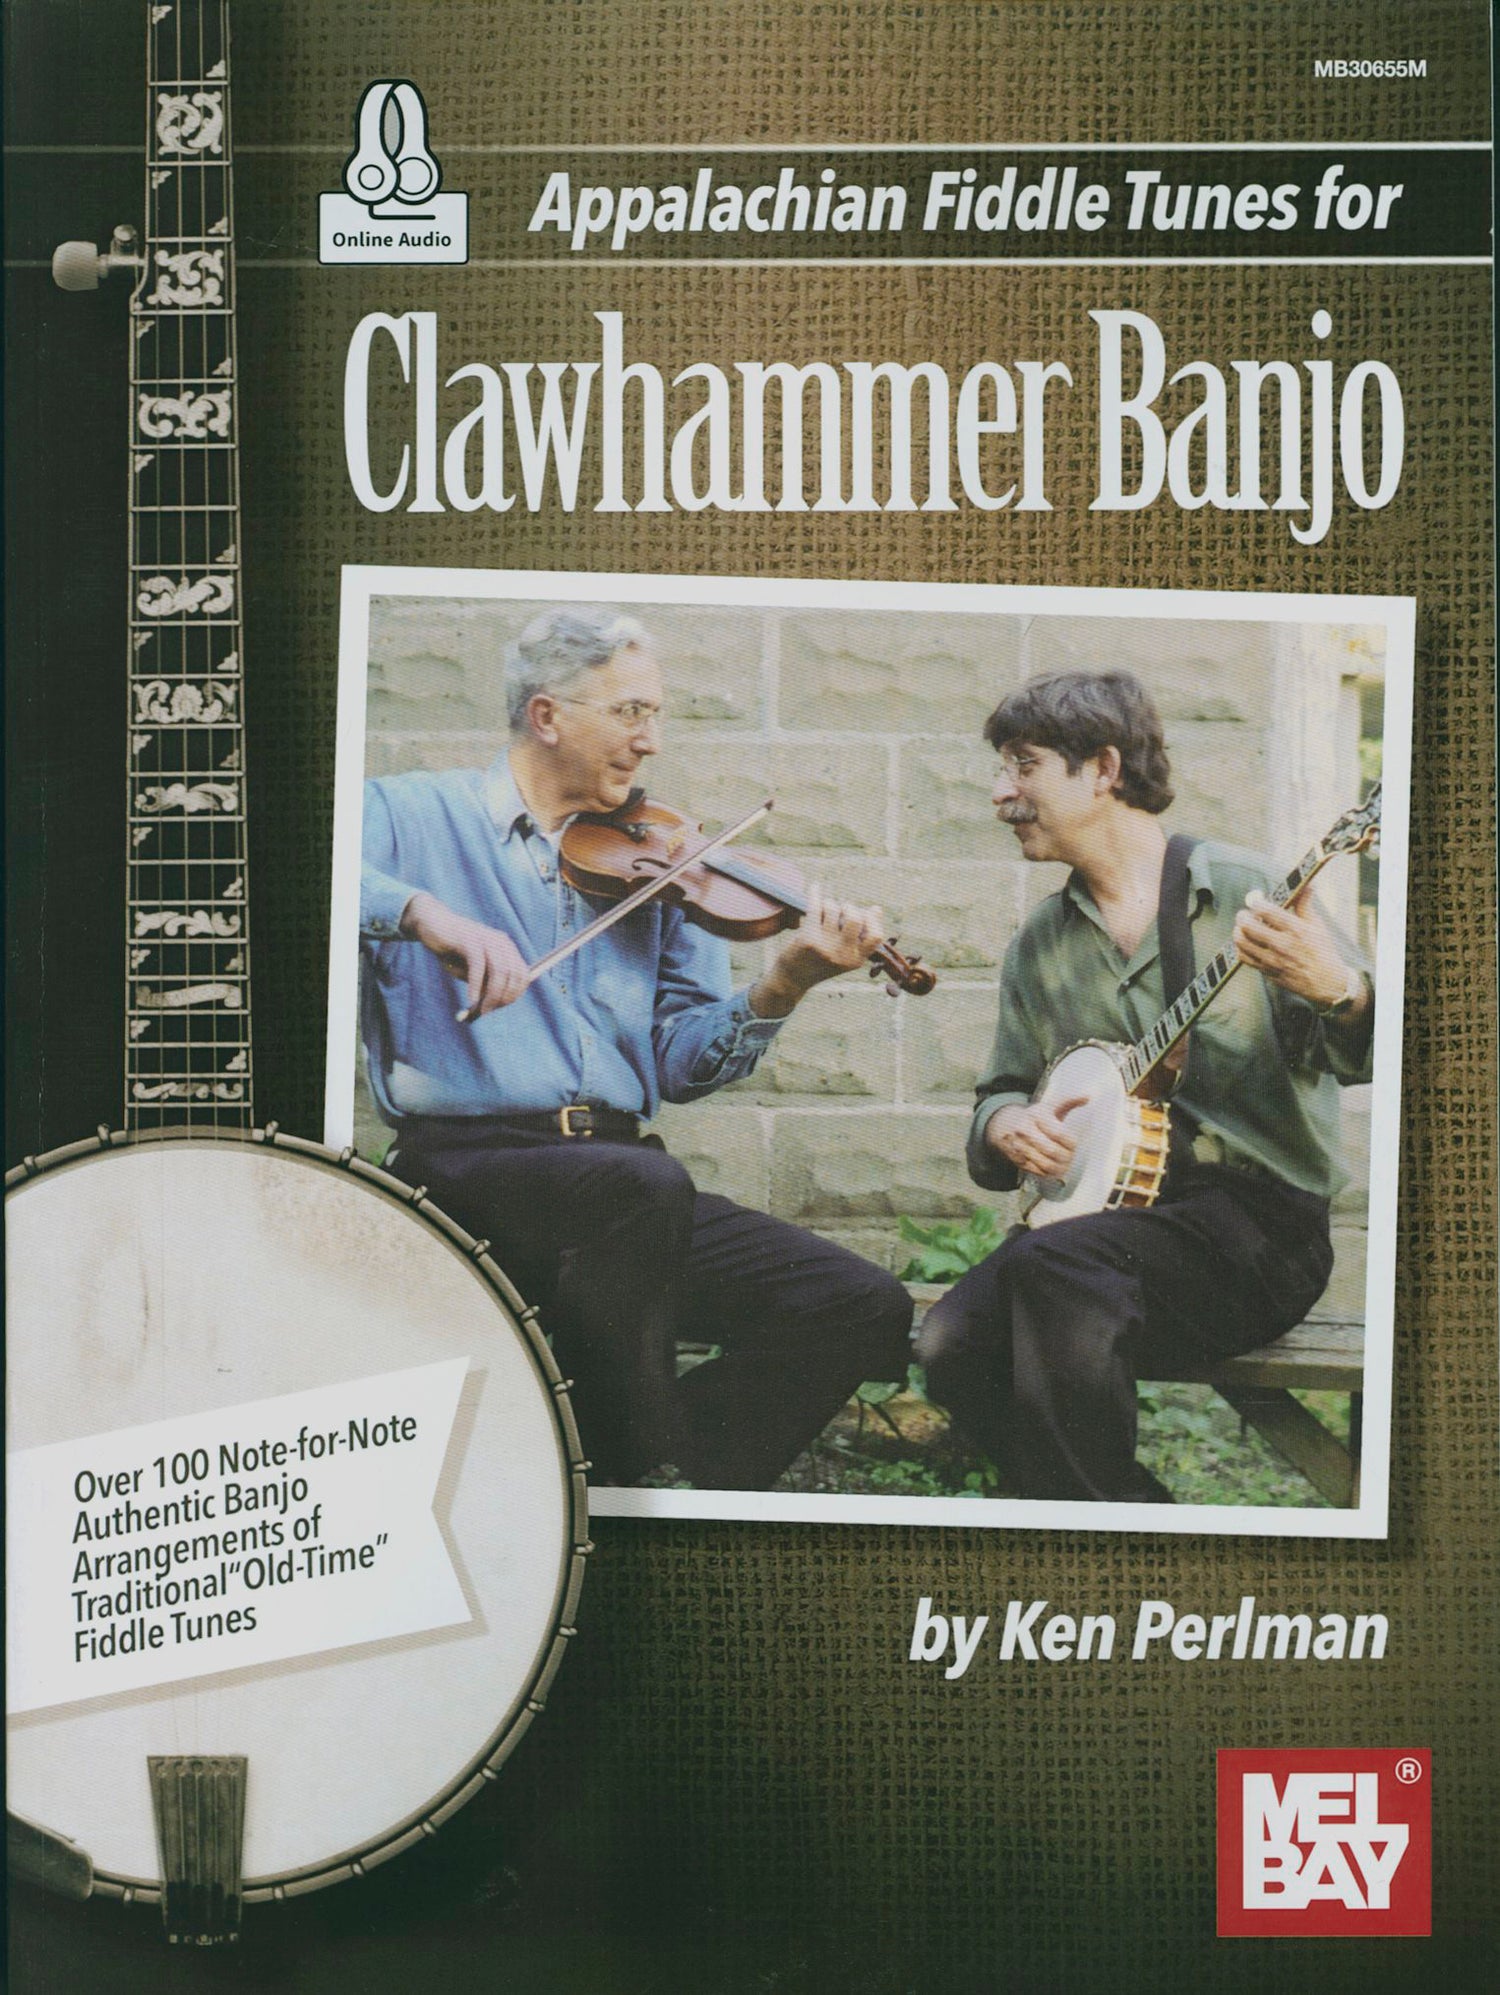 Image 1 of Appalachian Fiddle Tunes for Clawhammer Banjo - SKU# 02-30655M : Product Type Media : Elderly Instruments